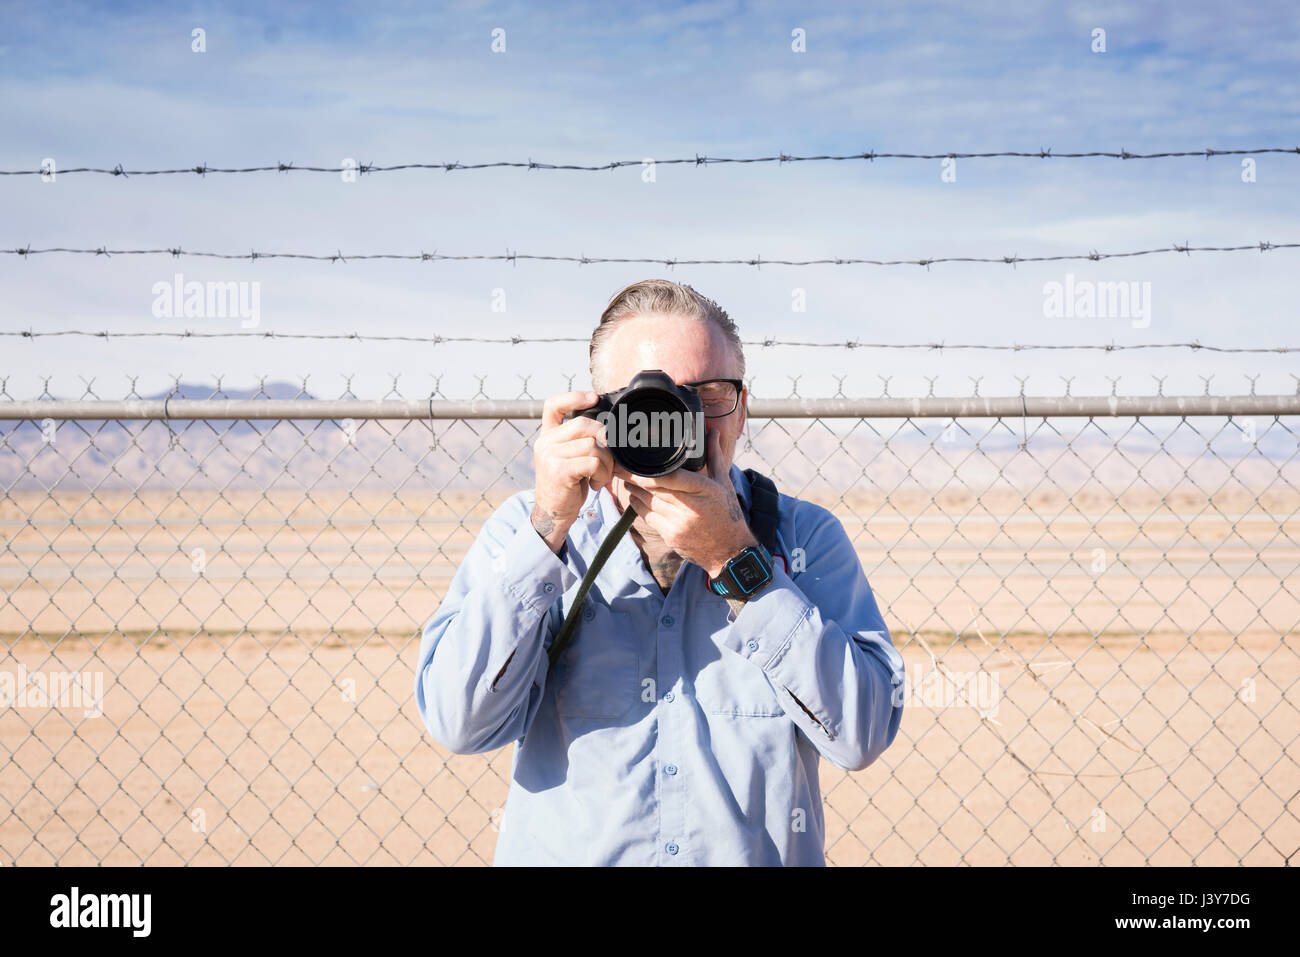 Photographer in front of barbed wire fence in desert taking photograph, California, USA Stock Photo